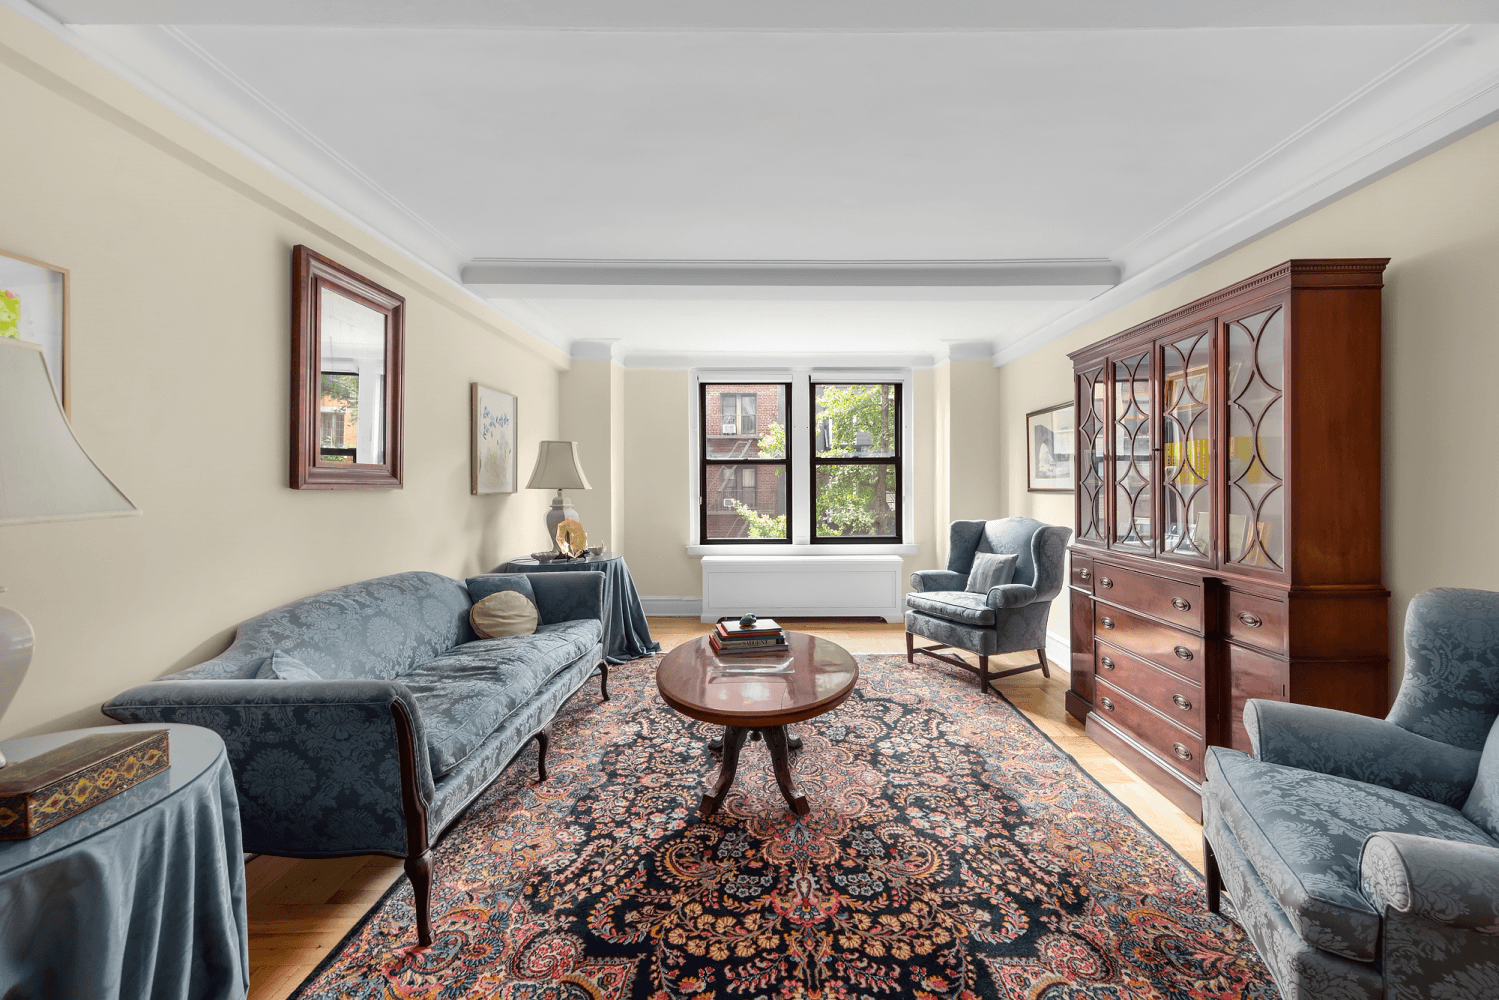 Step into the classic combination apartment through a gracious foyer, leading into an oversized living room with a beamed ceiling and hardwood floors, facing south.